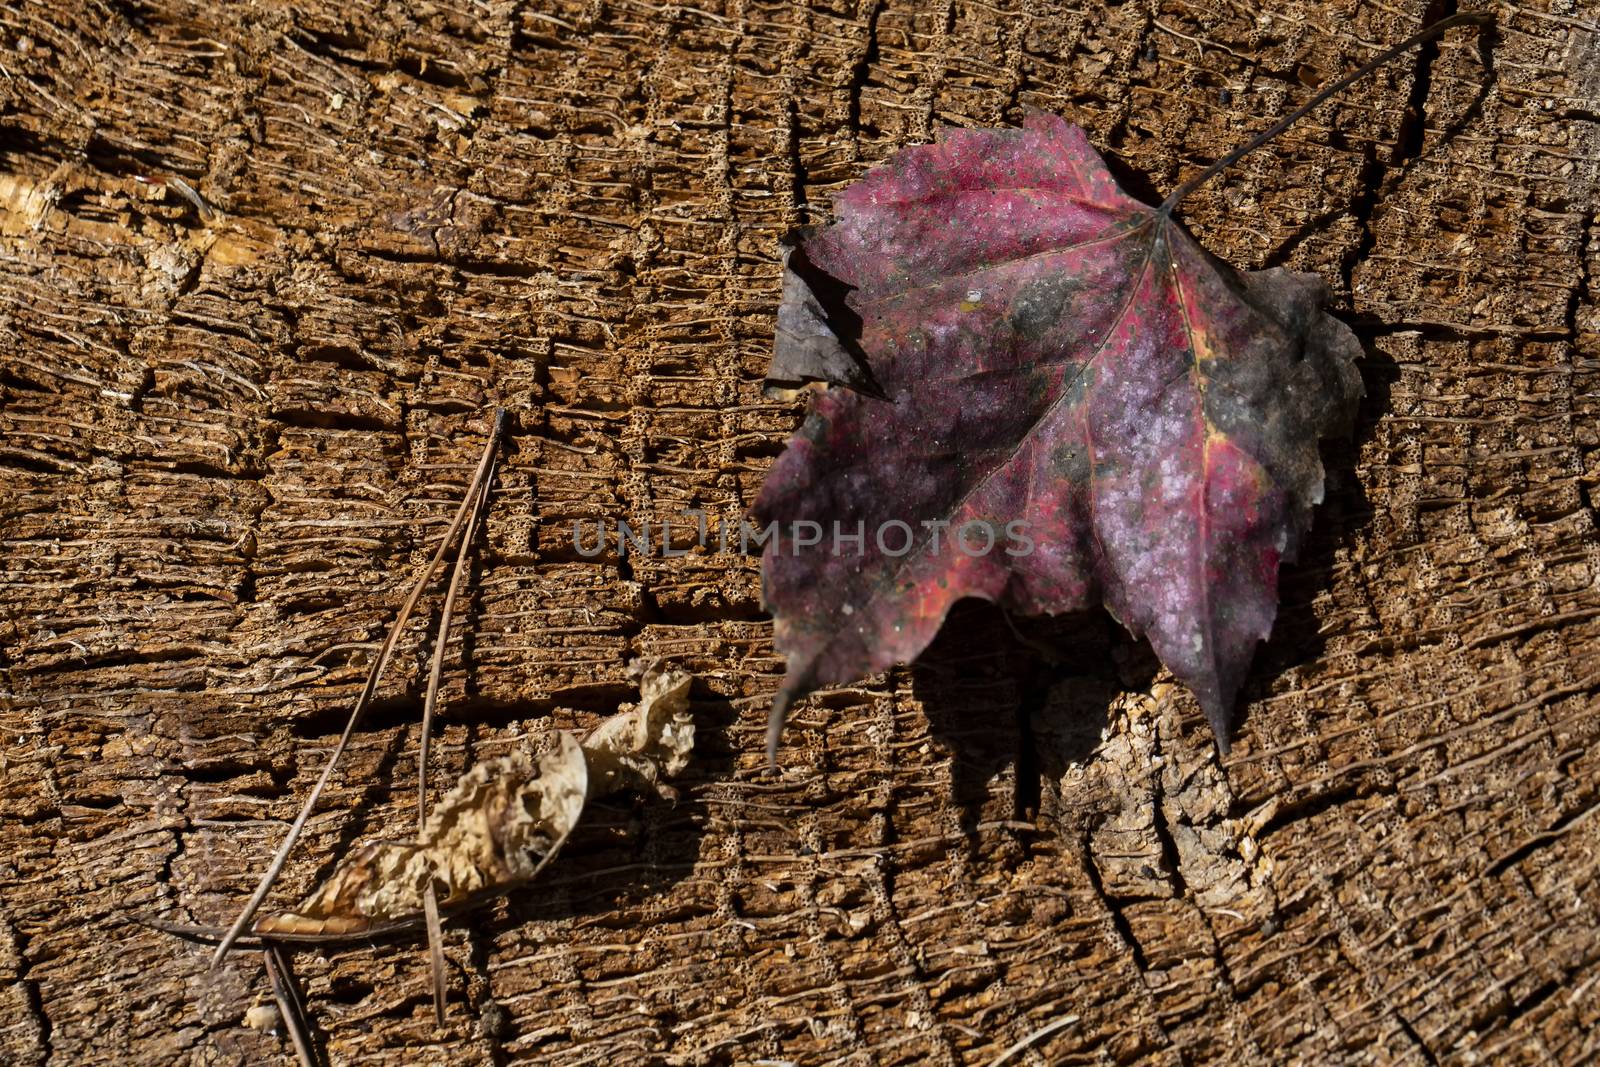 Fallen leaves and pine needle on a tree stump reflect fall colors.